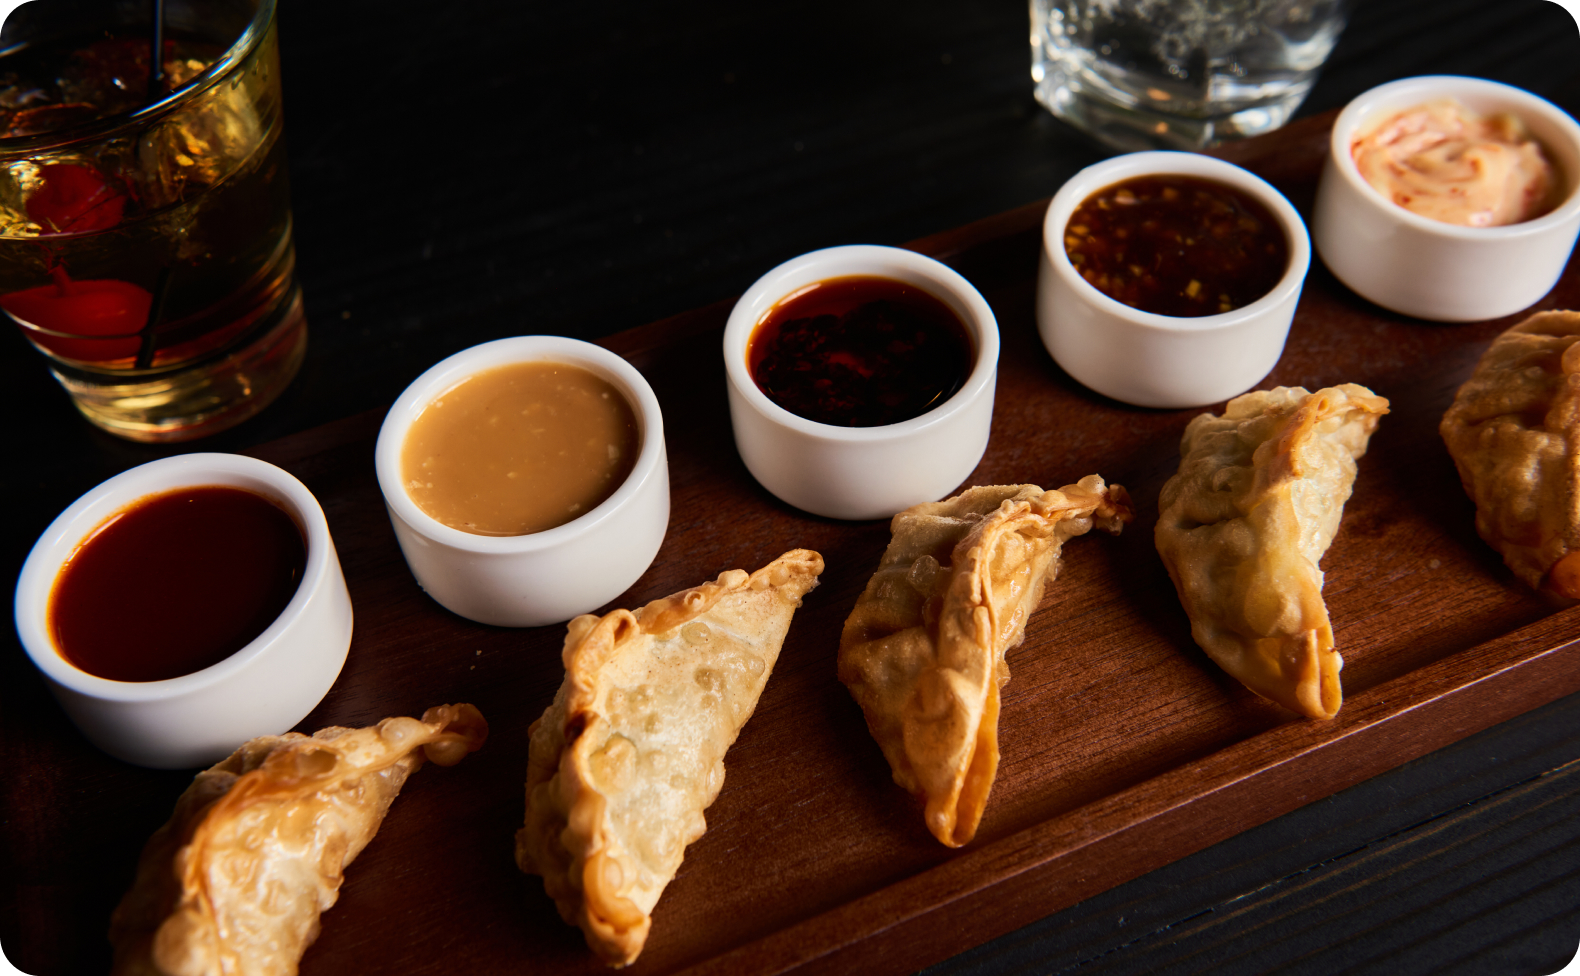 Tray of dumplings with a variety of dipping sauces.